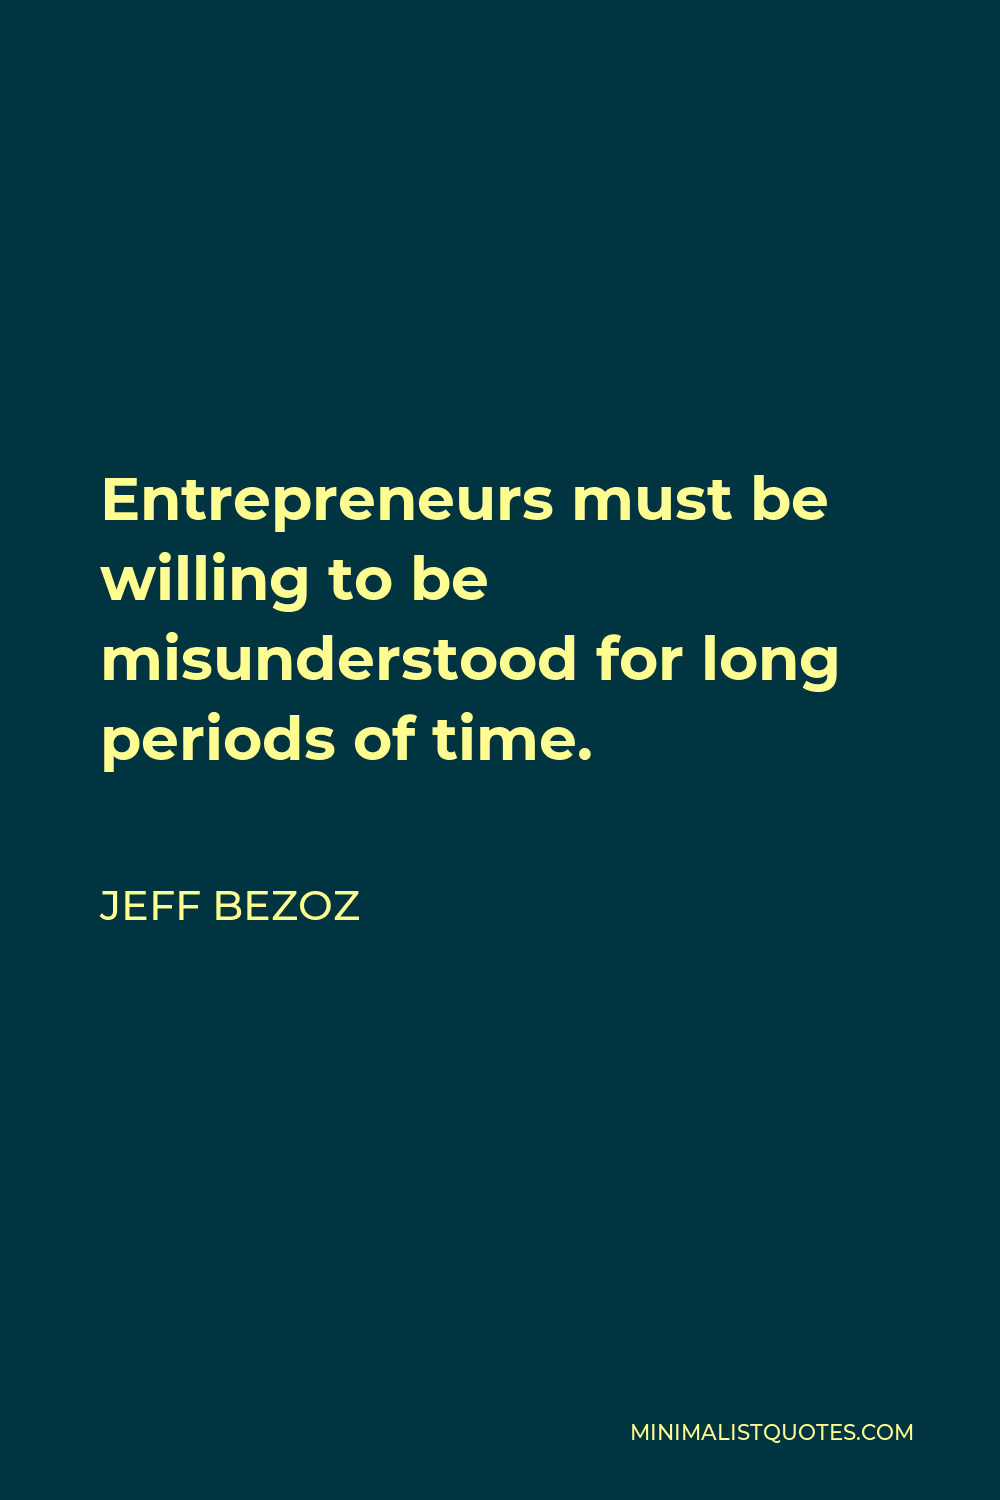 Jeff Bezoz Quote - Entrepreneurs must be willing to be misunderstood for long periods of time.